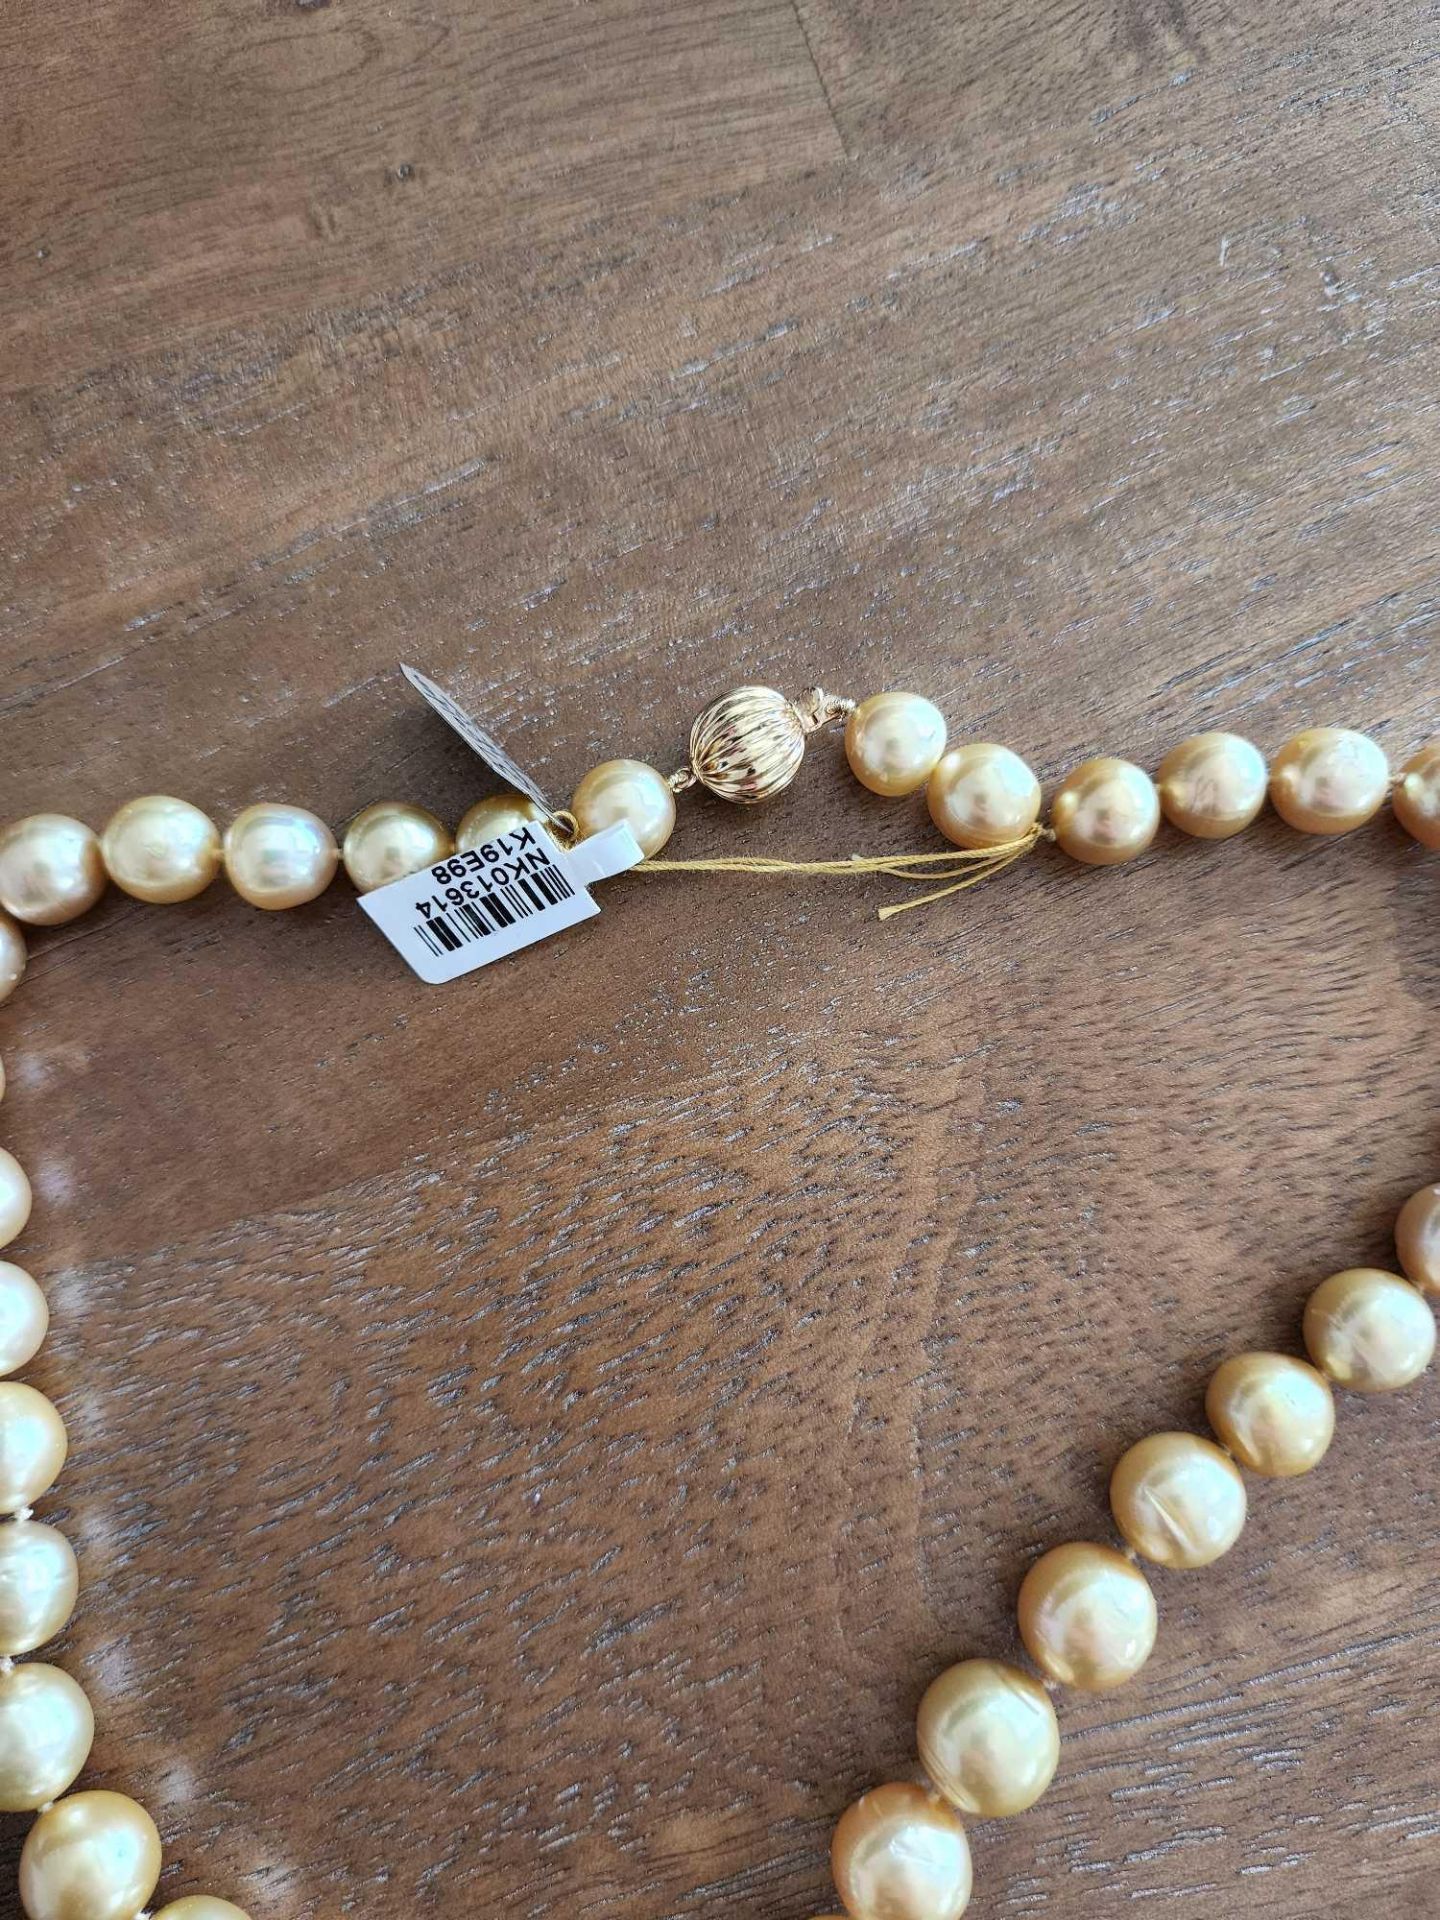 Golden South Sea Pearl Necklace - Image 6 of 8